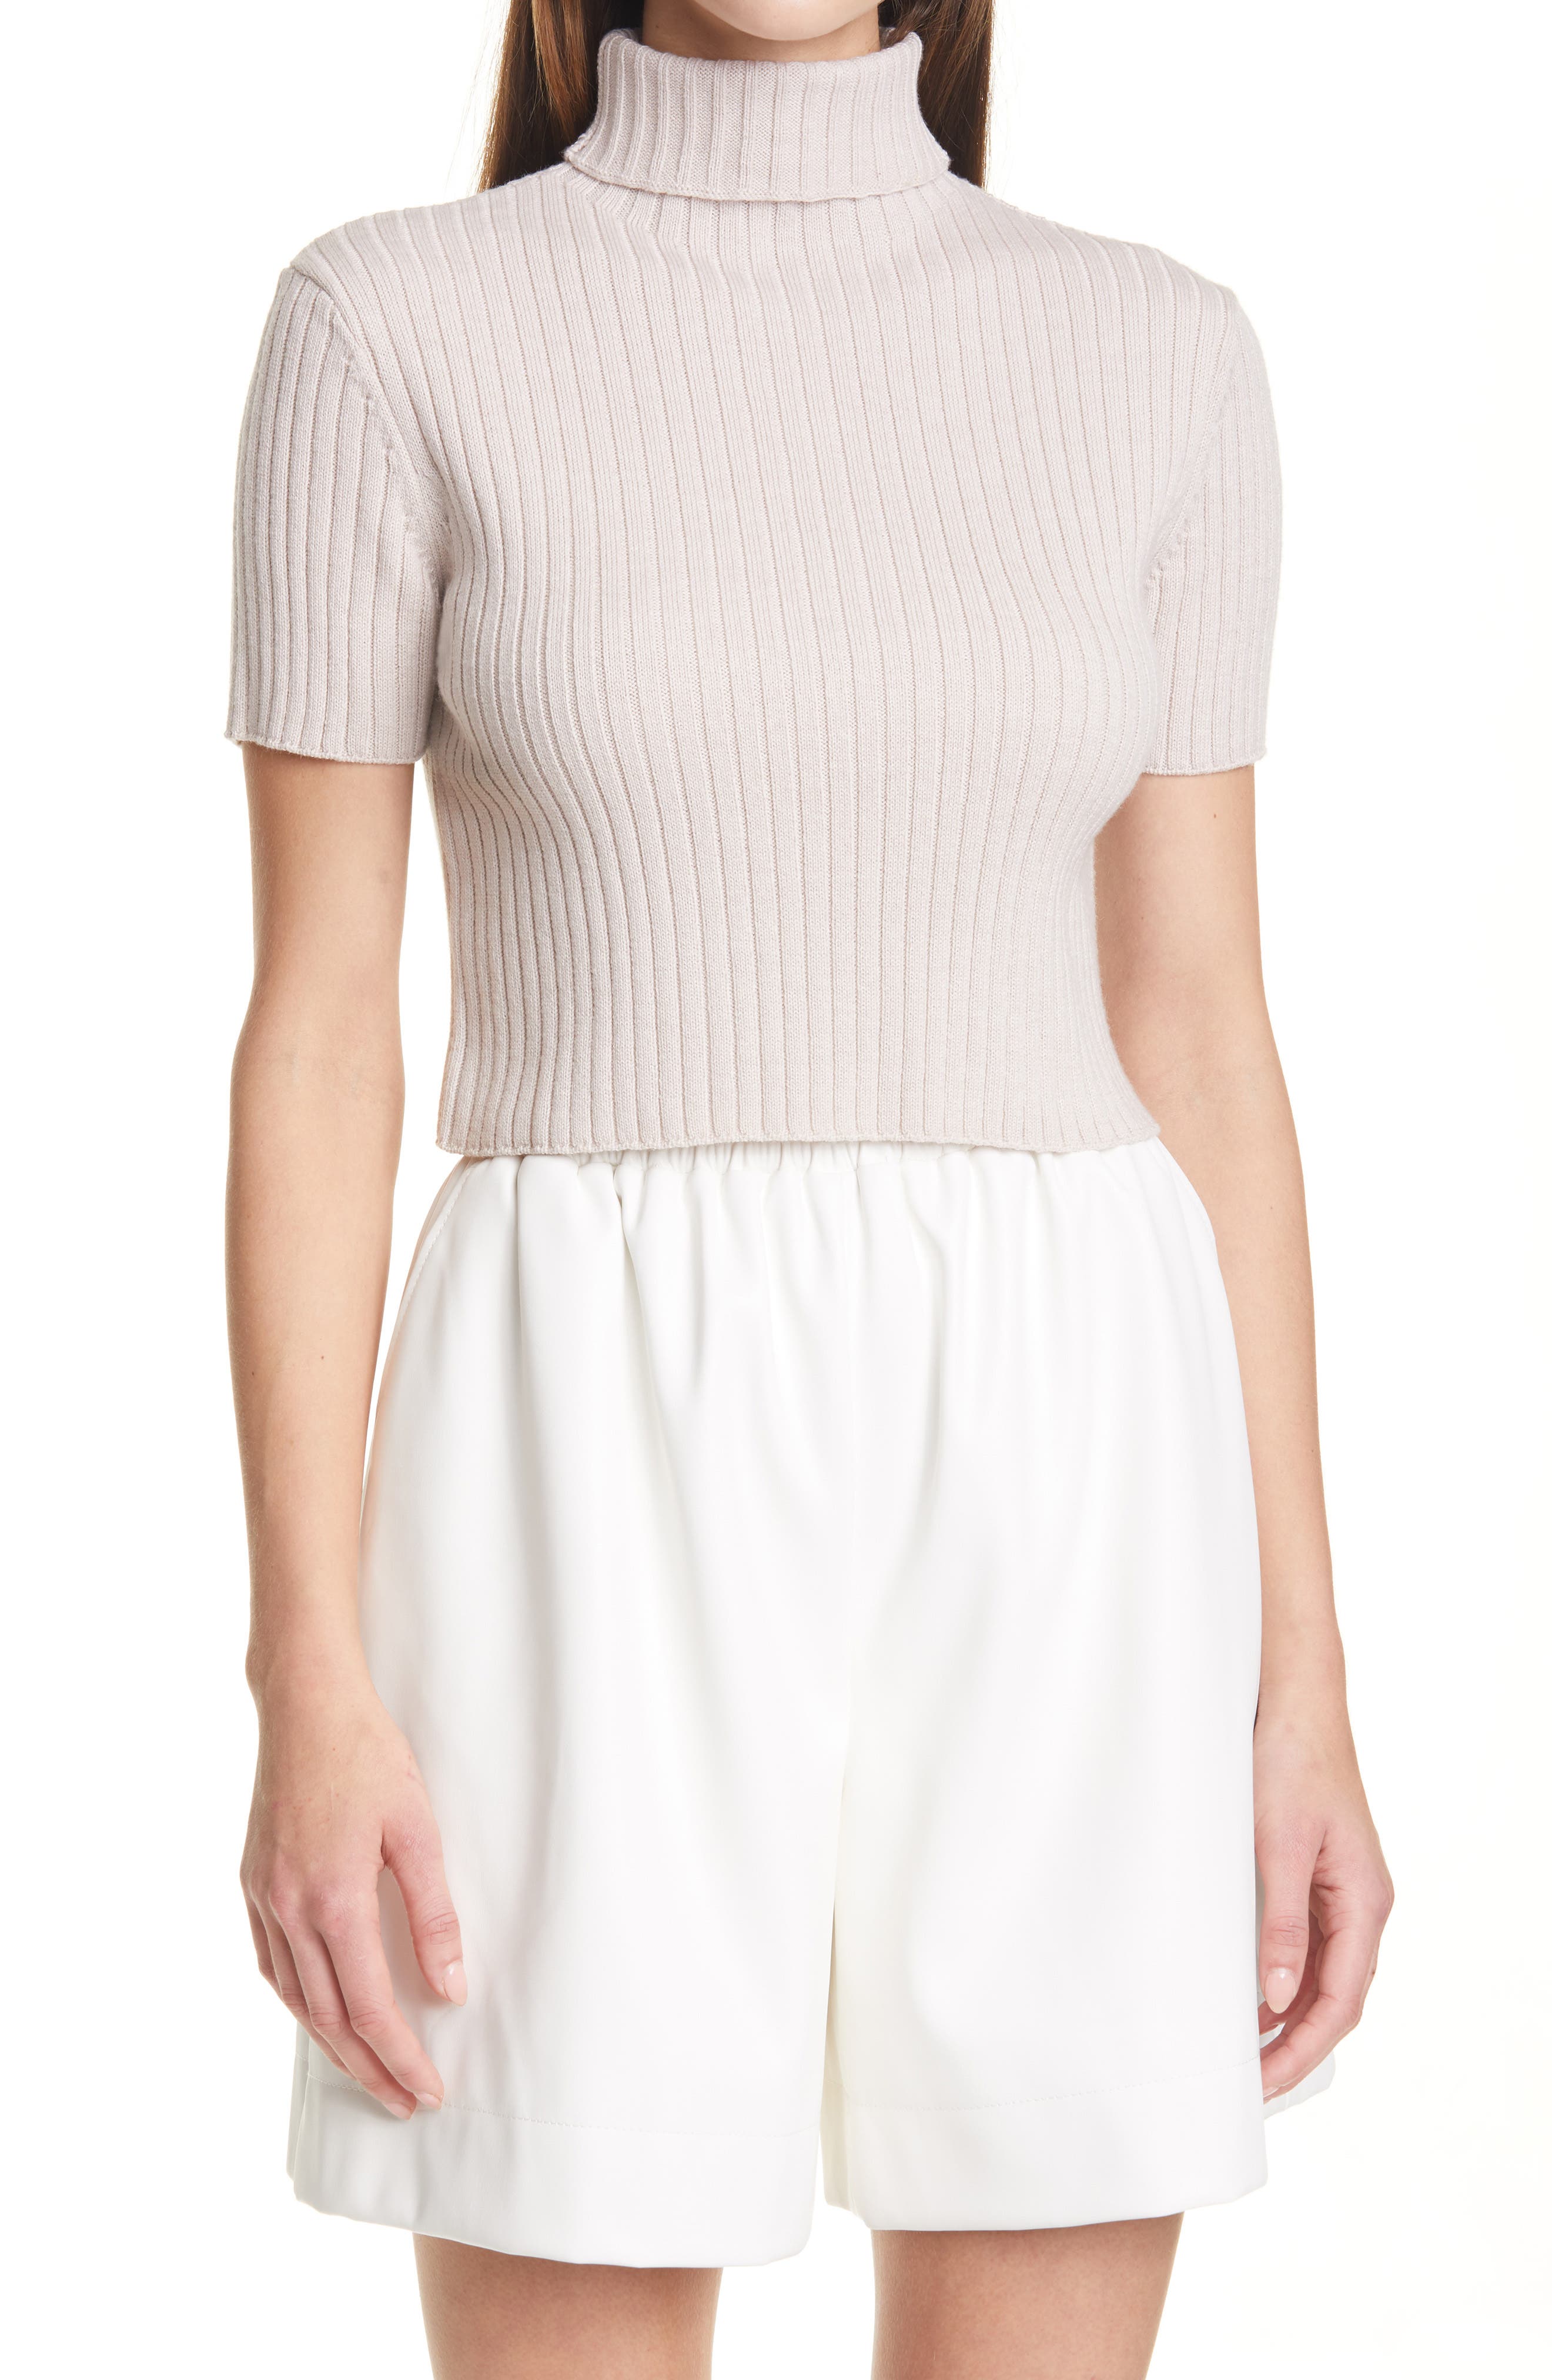 STAUD Lilou Crop Wool Blend Turtleneck Sweater in Light Oatmeal at Nordstrom, Size Large